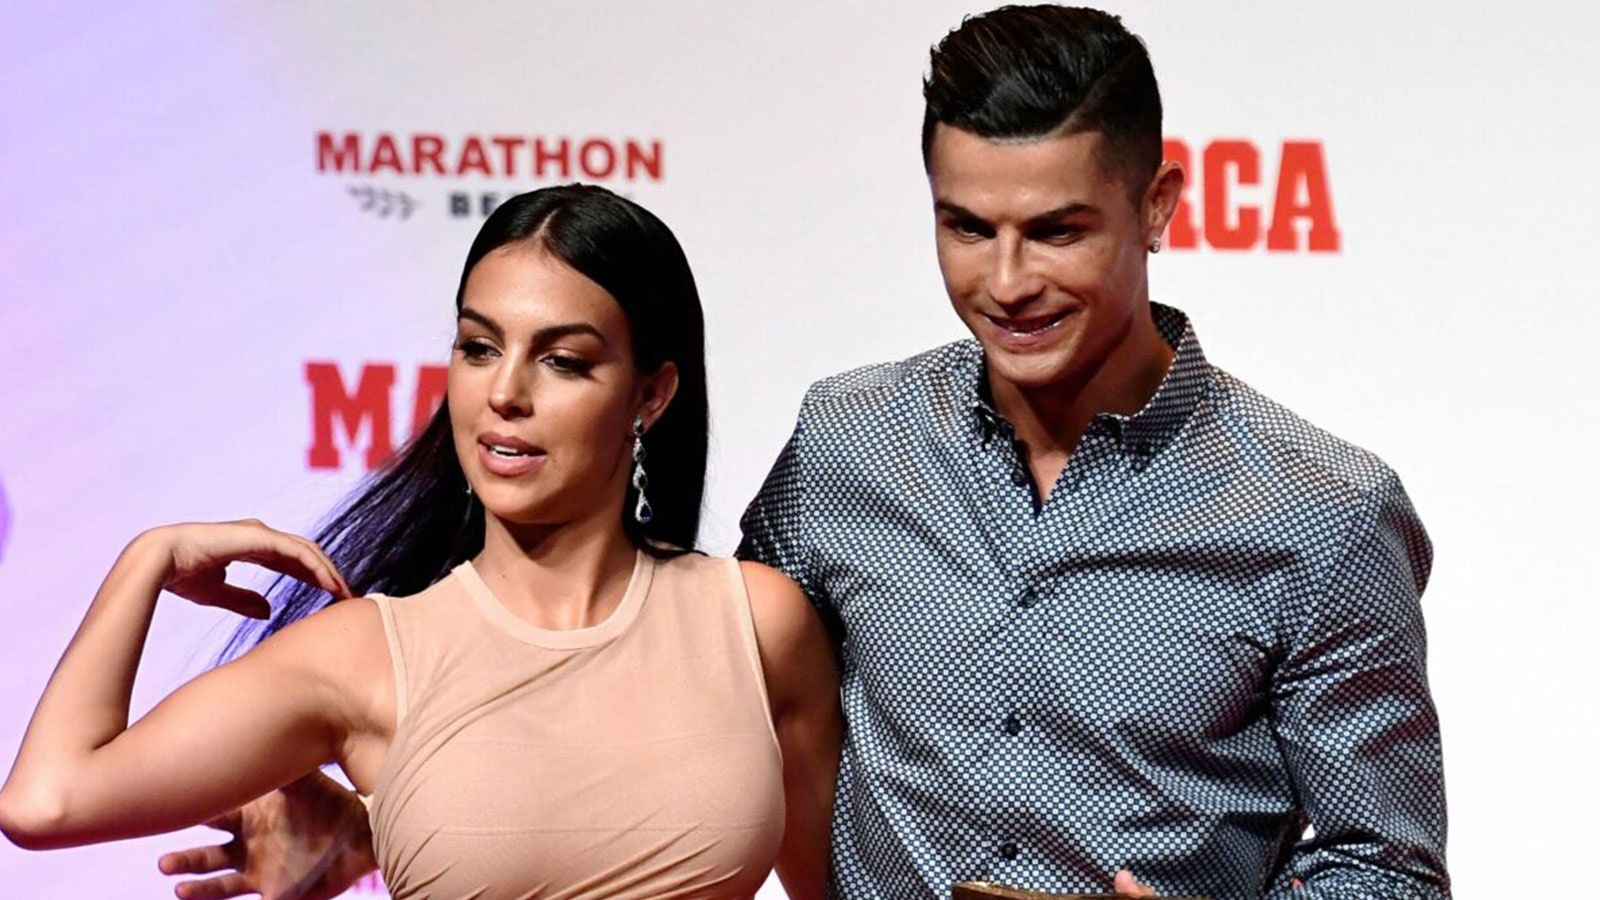 Georgina reveals her poverty before marrying Ronaldo. This is the "heater" story!